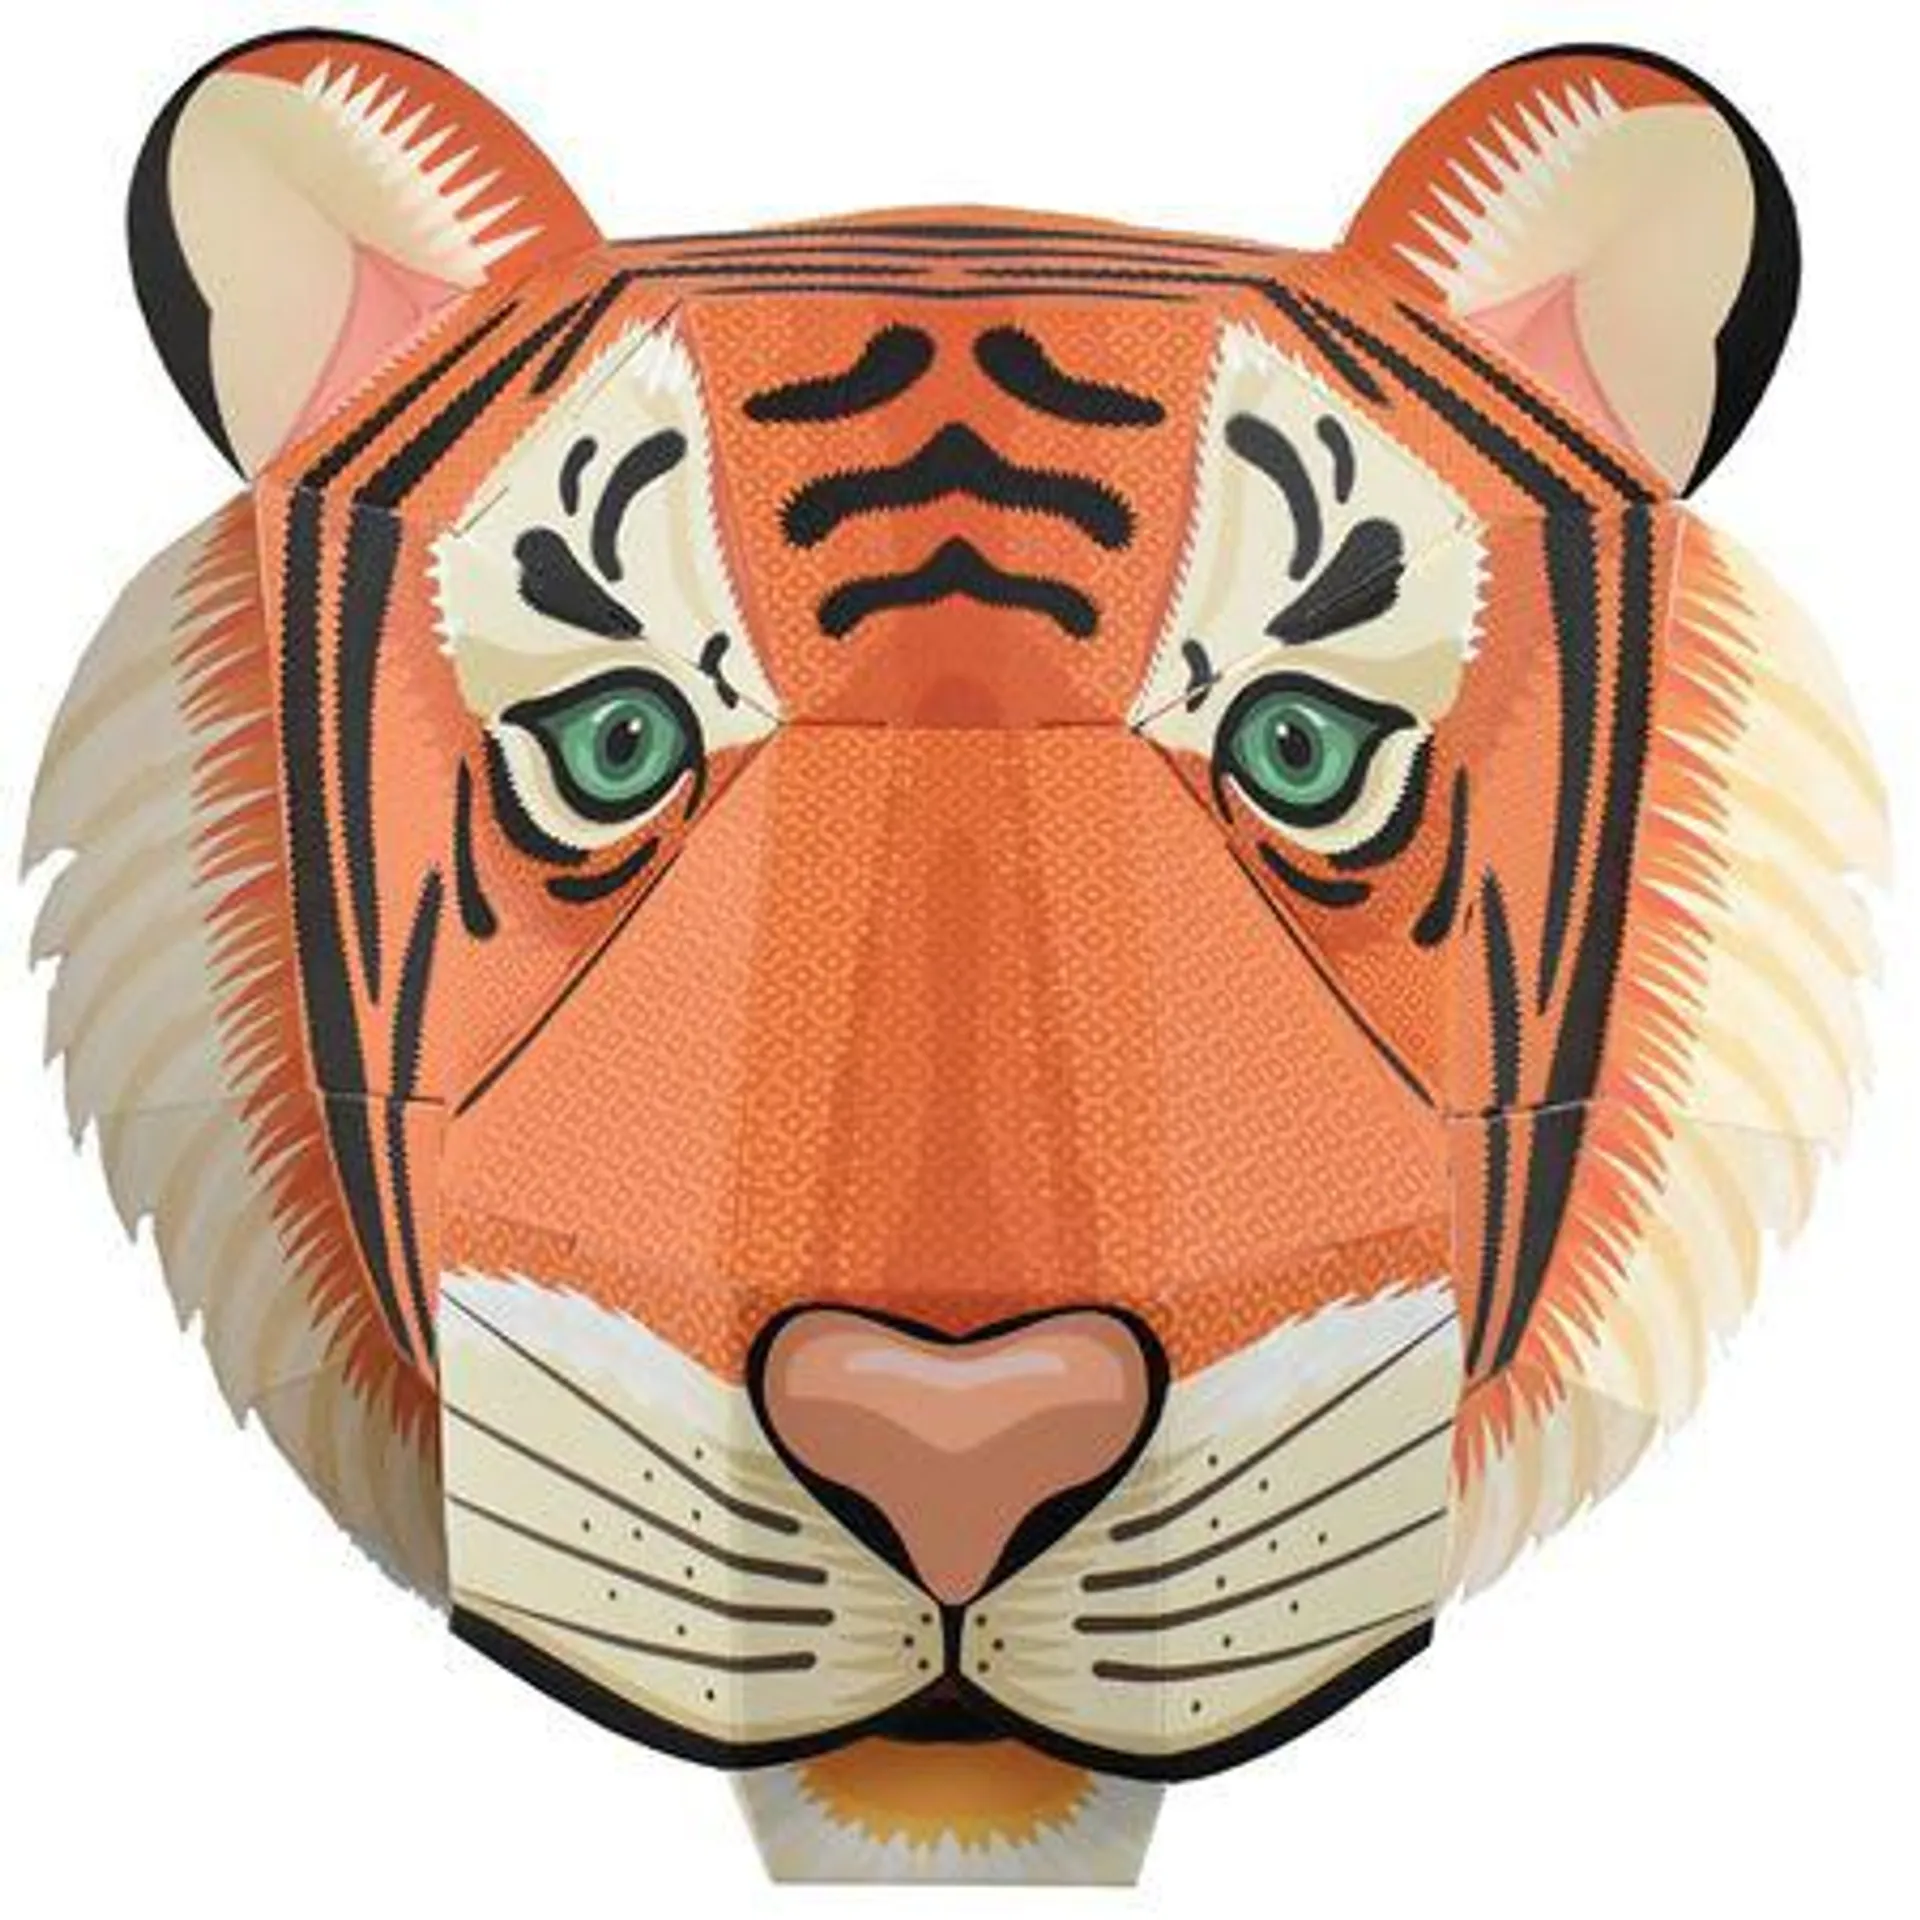 Create Your Own Tiger Head